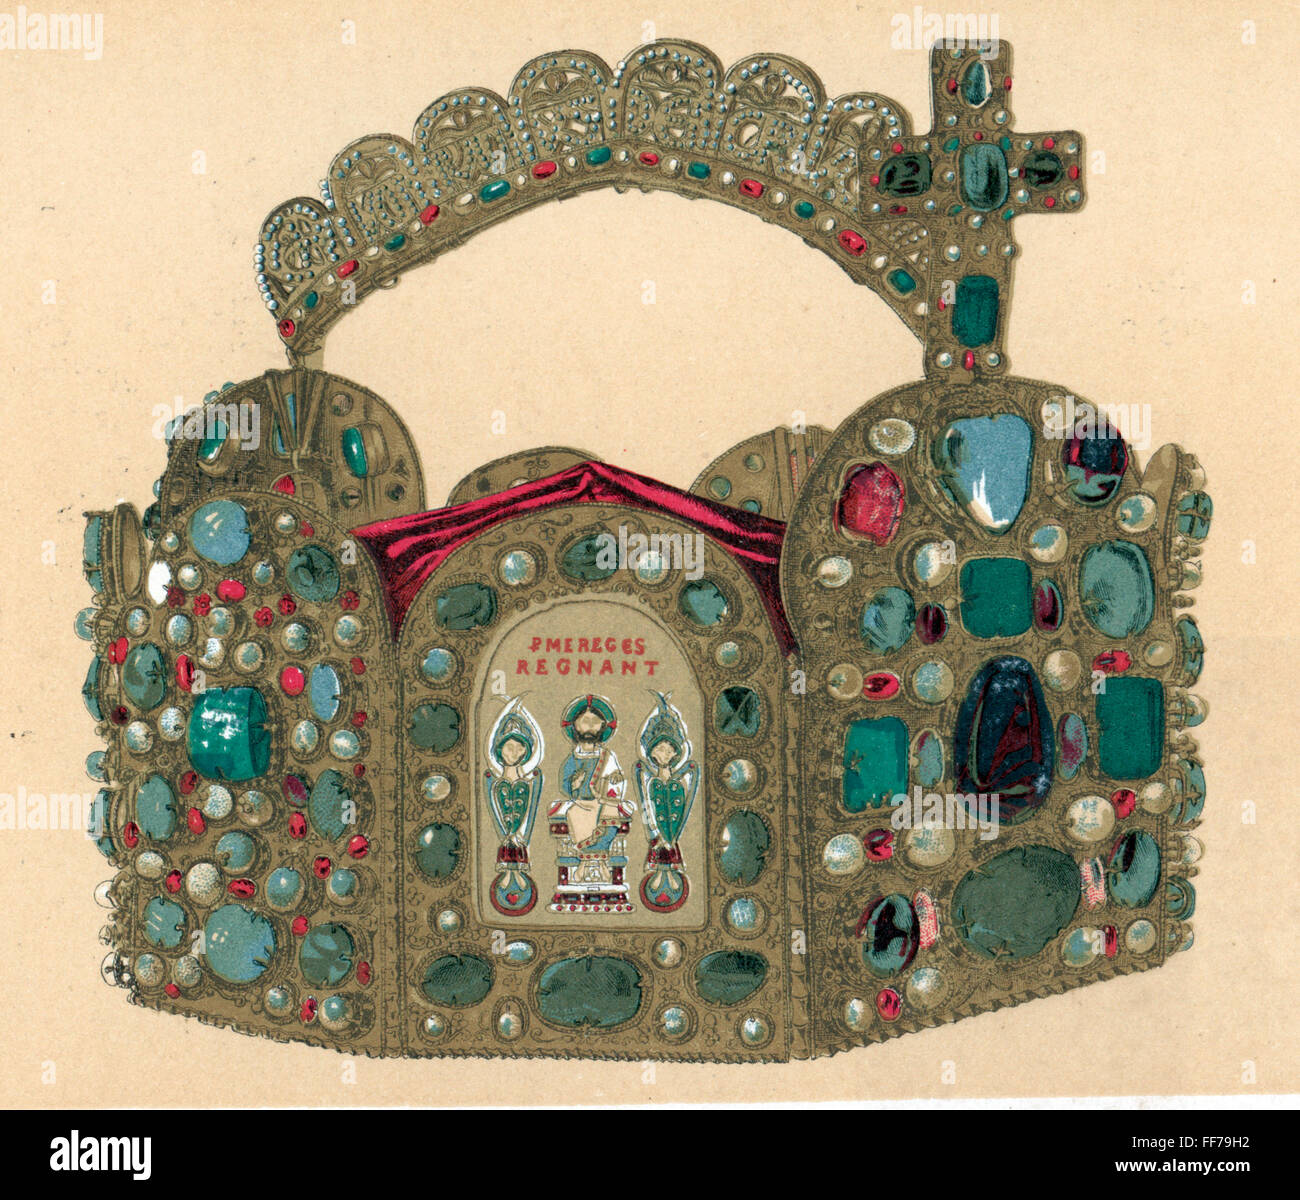 crowns / crown jewels,Holy Roman Empire,imperial crown of the kings and emperors,second half 10th century,chromolithograph,treasury,Hofburg Palace,Vienna,10th century,Middle Ages,medieval,mediaeval,Holy Roman Empire,Imperial Regalia,crown imperial,imperial crowns,hoop crown,crown jewels,gold,gemstone,gem,gems,gemstones,precious stone,precious stones,jewel,jewels,jewellery,jeweled,jeweling,enamel,cross,crosses,religion,religions,Christianity,Jesus Christ,reign,symbol,symbols,crown,crowns,king,kings,emperor,emperors,c,Additional-Rights-Clearences-Not Available Stock Photo